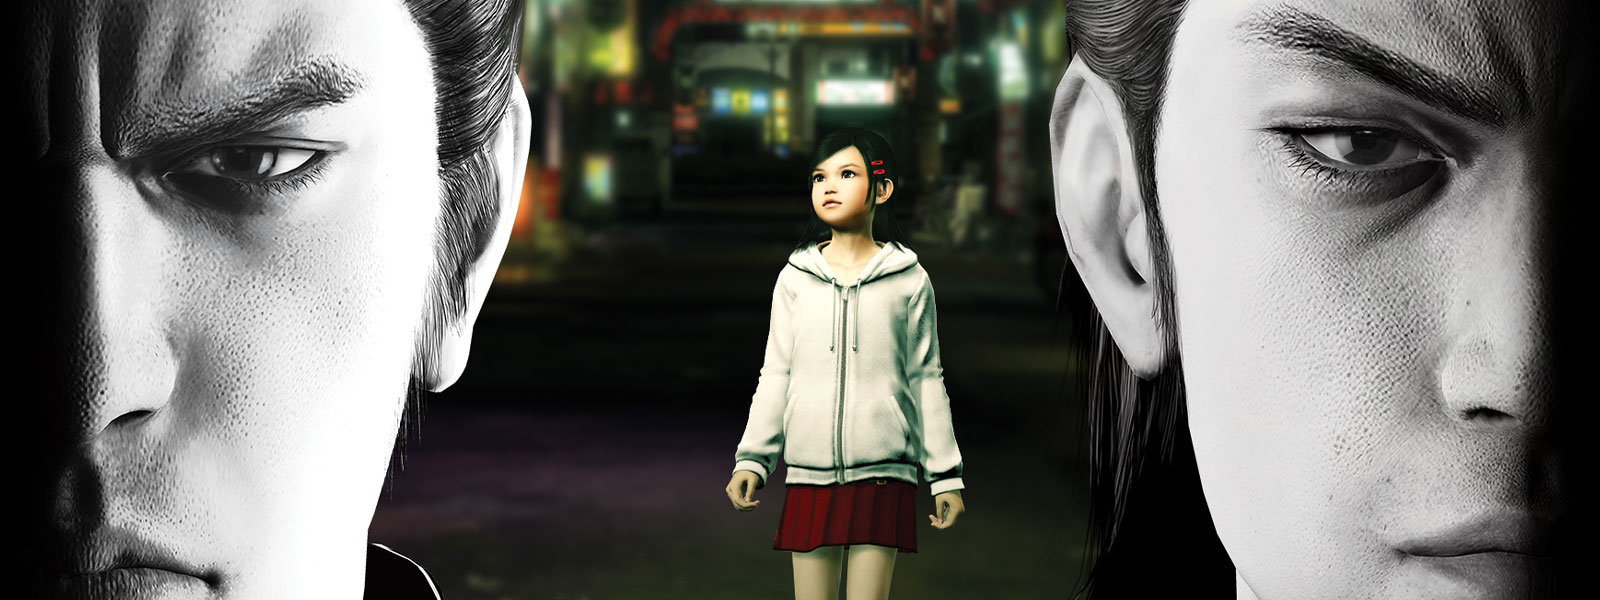 Two Yakuza characters stare sombrely ahead, while a little girl stands in the city behind them.